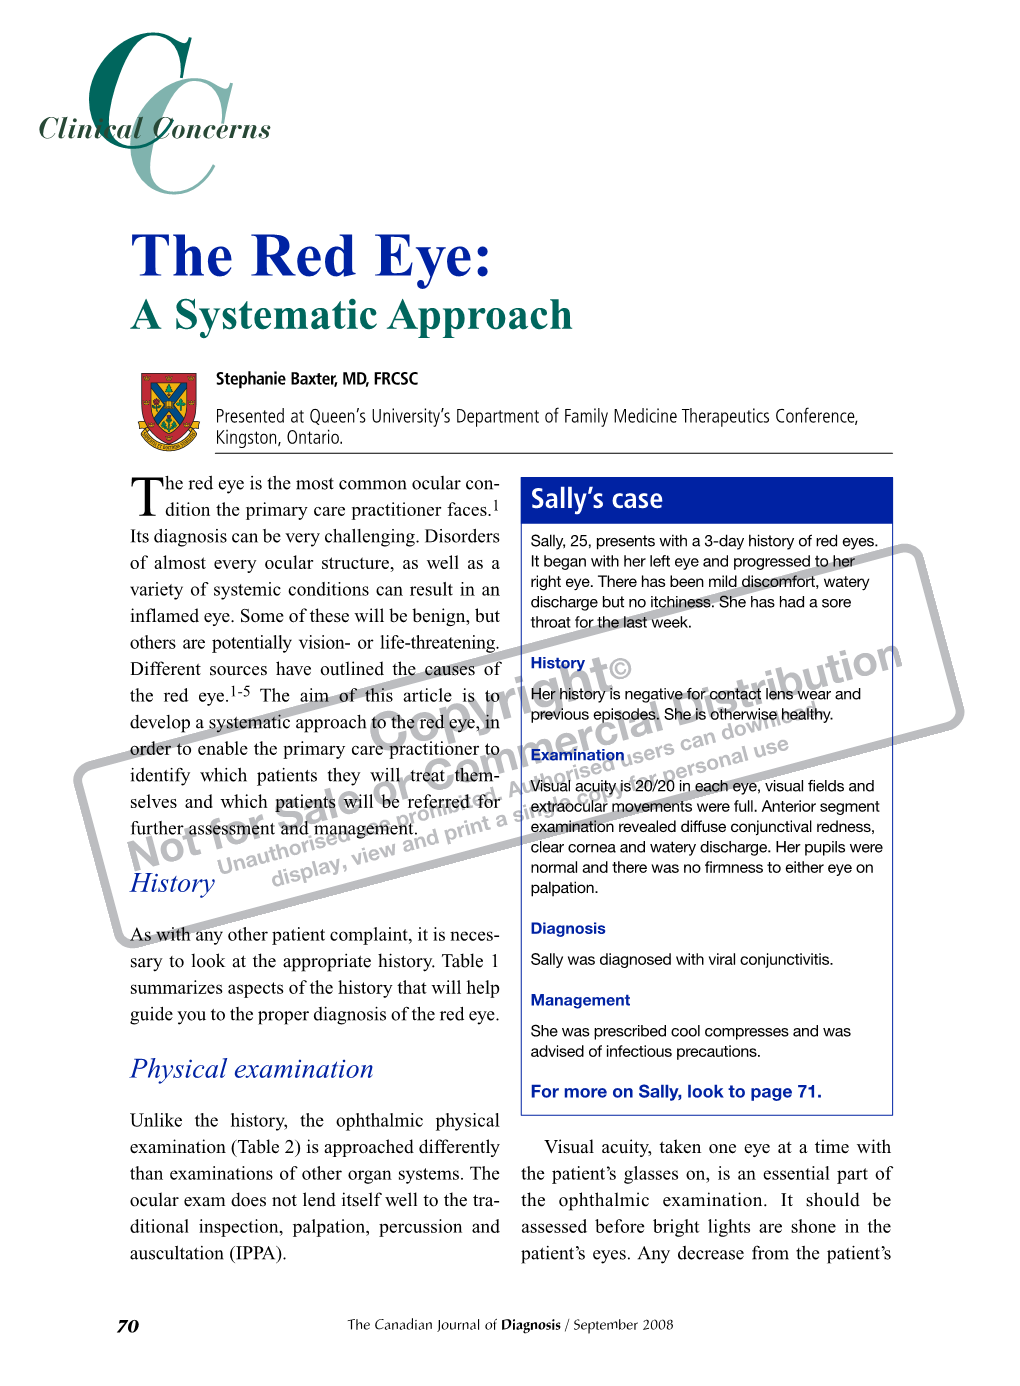 The Red Eye: a Systematic Approach